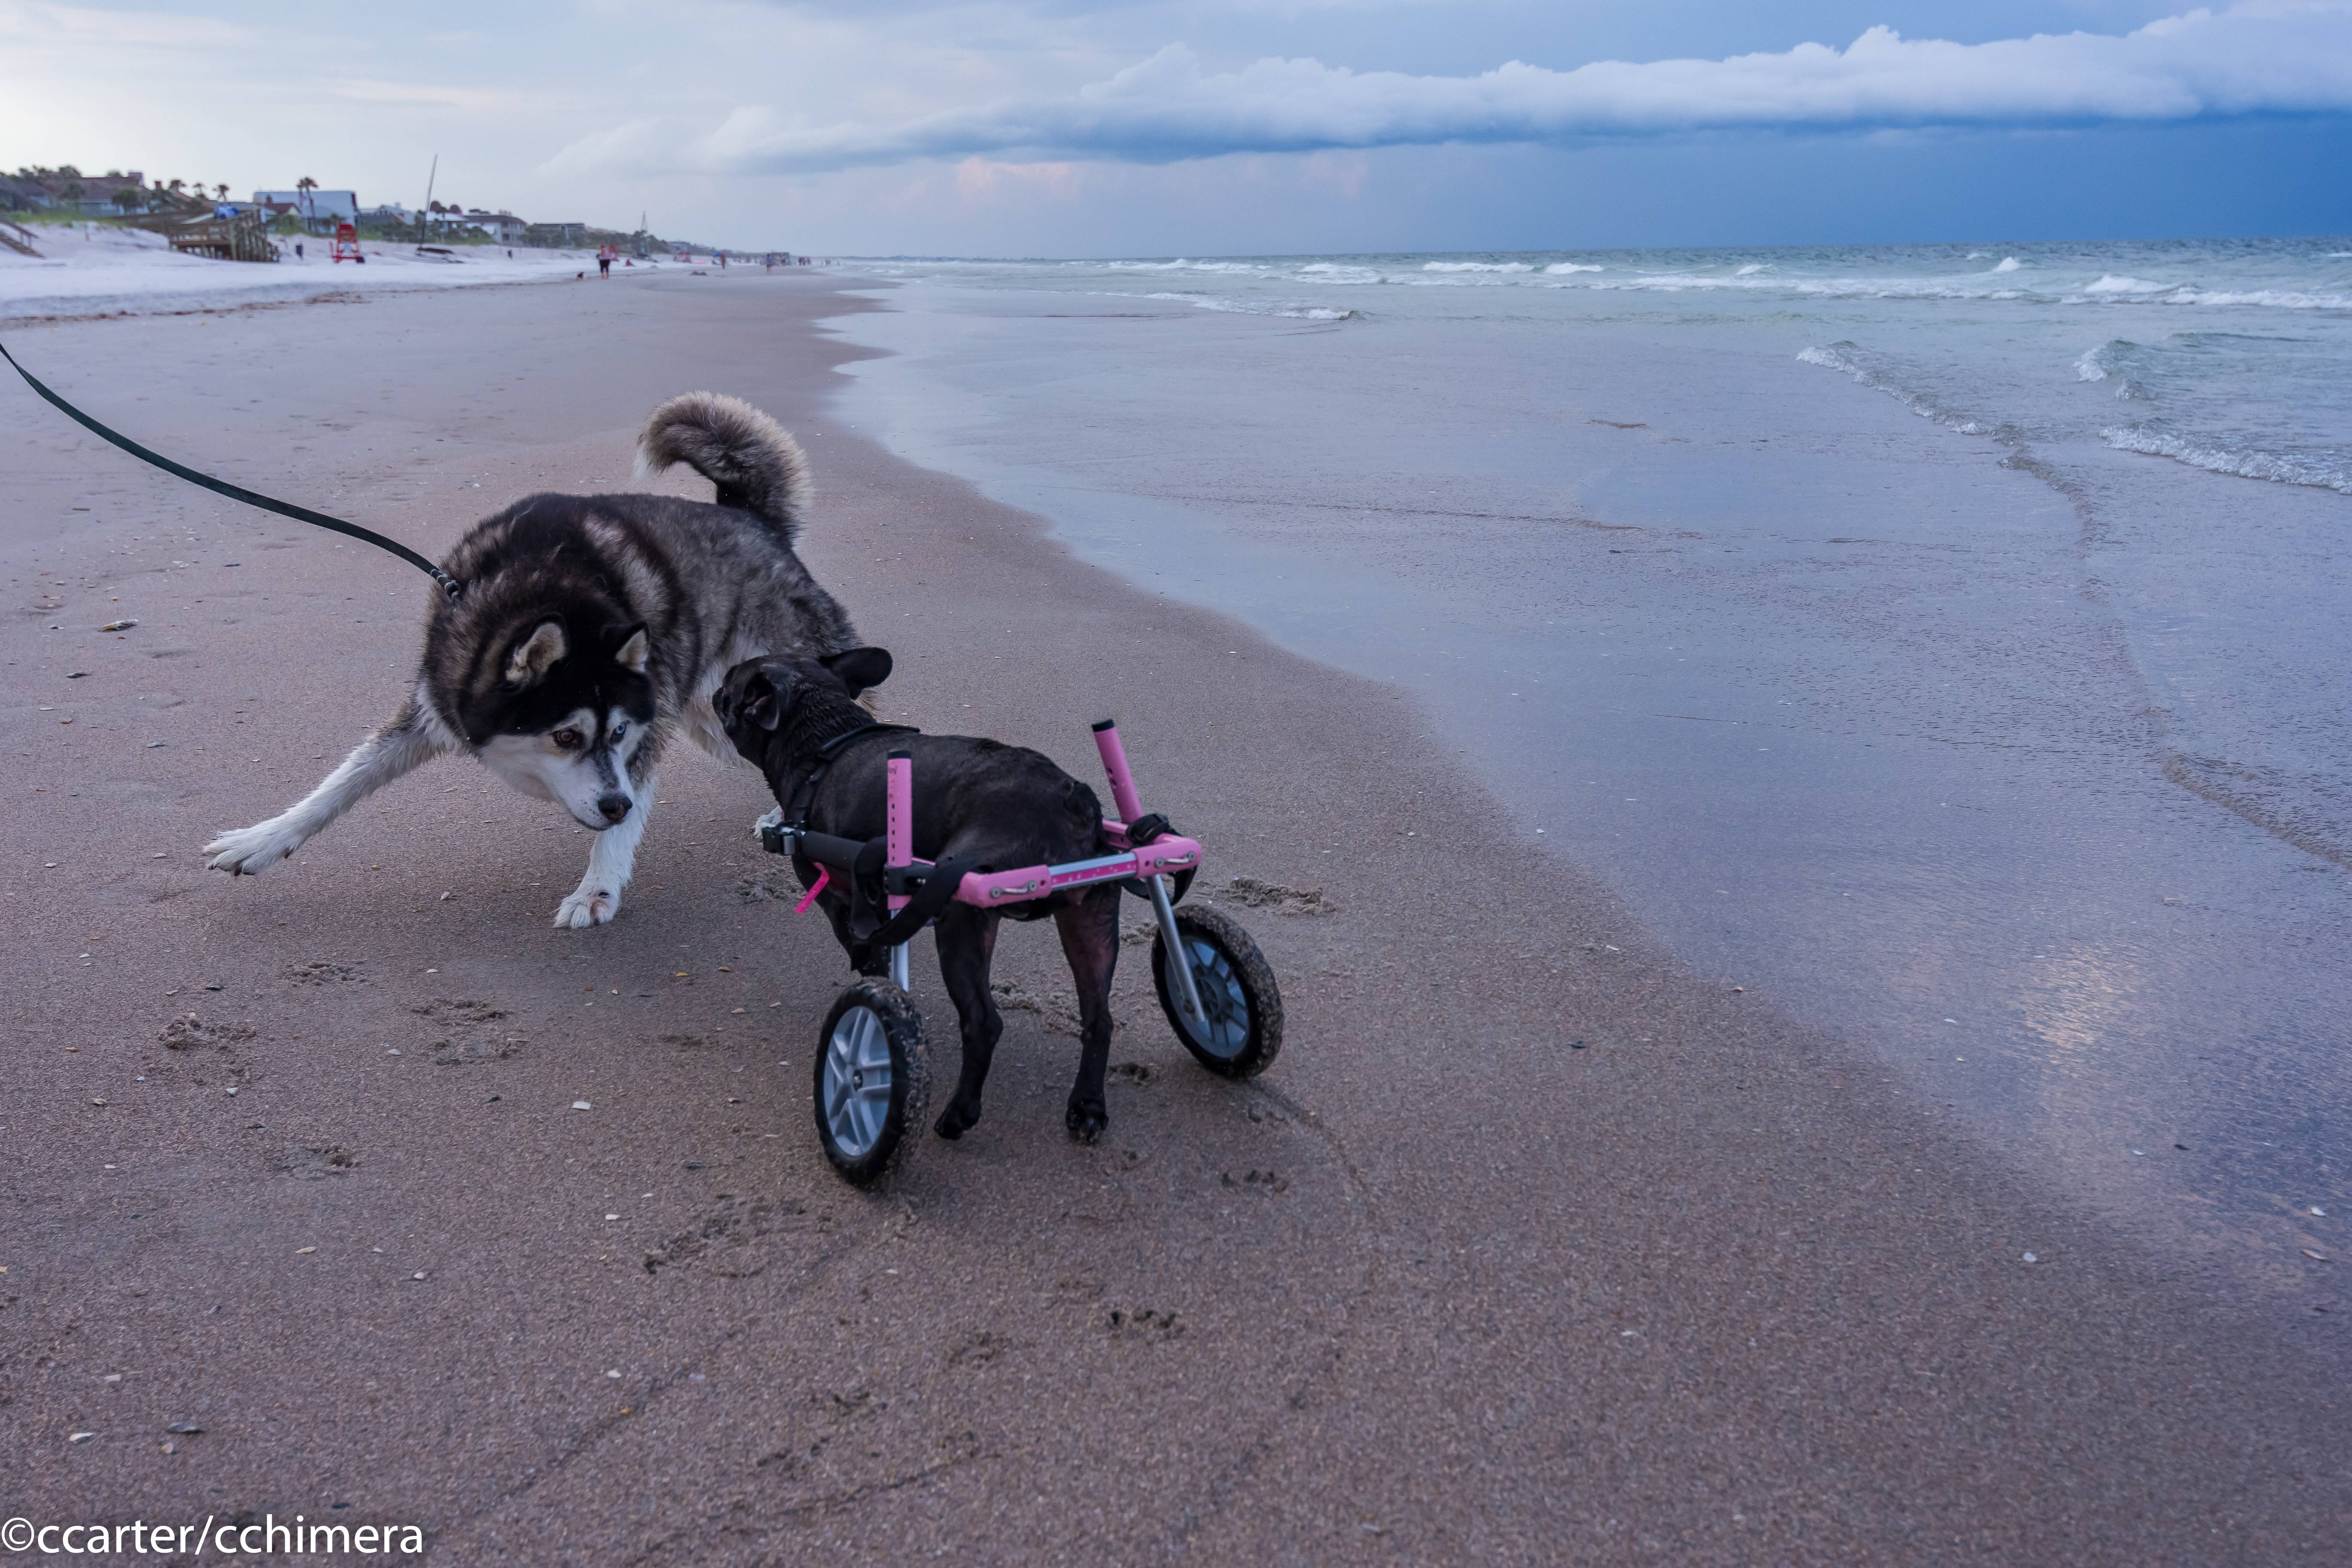 The city of Atlantic Beach has very dog-friendly policies. Please follow the rules if you visit, helping to ensure a long future for Fido on the beach.